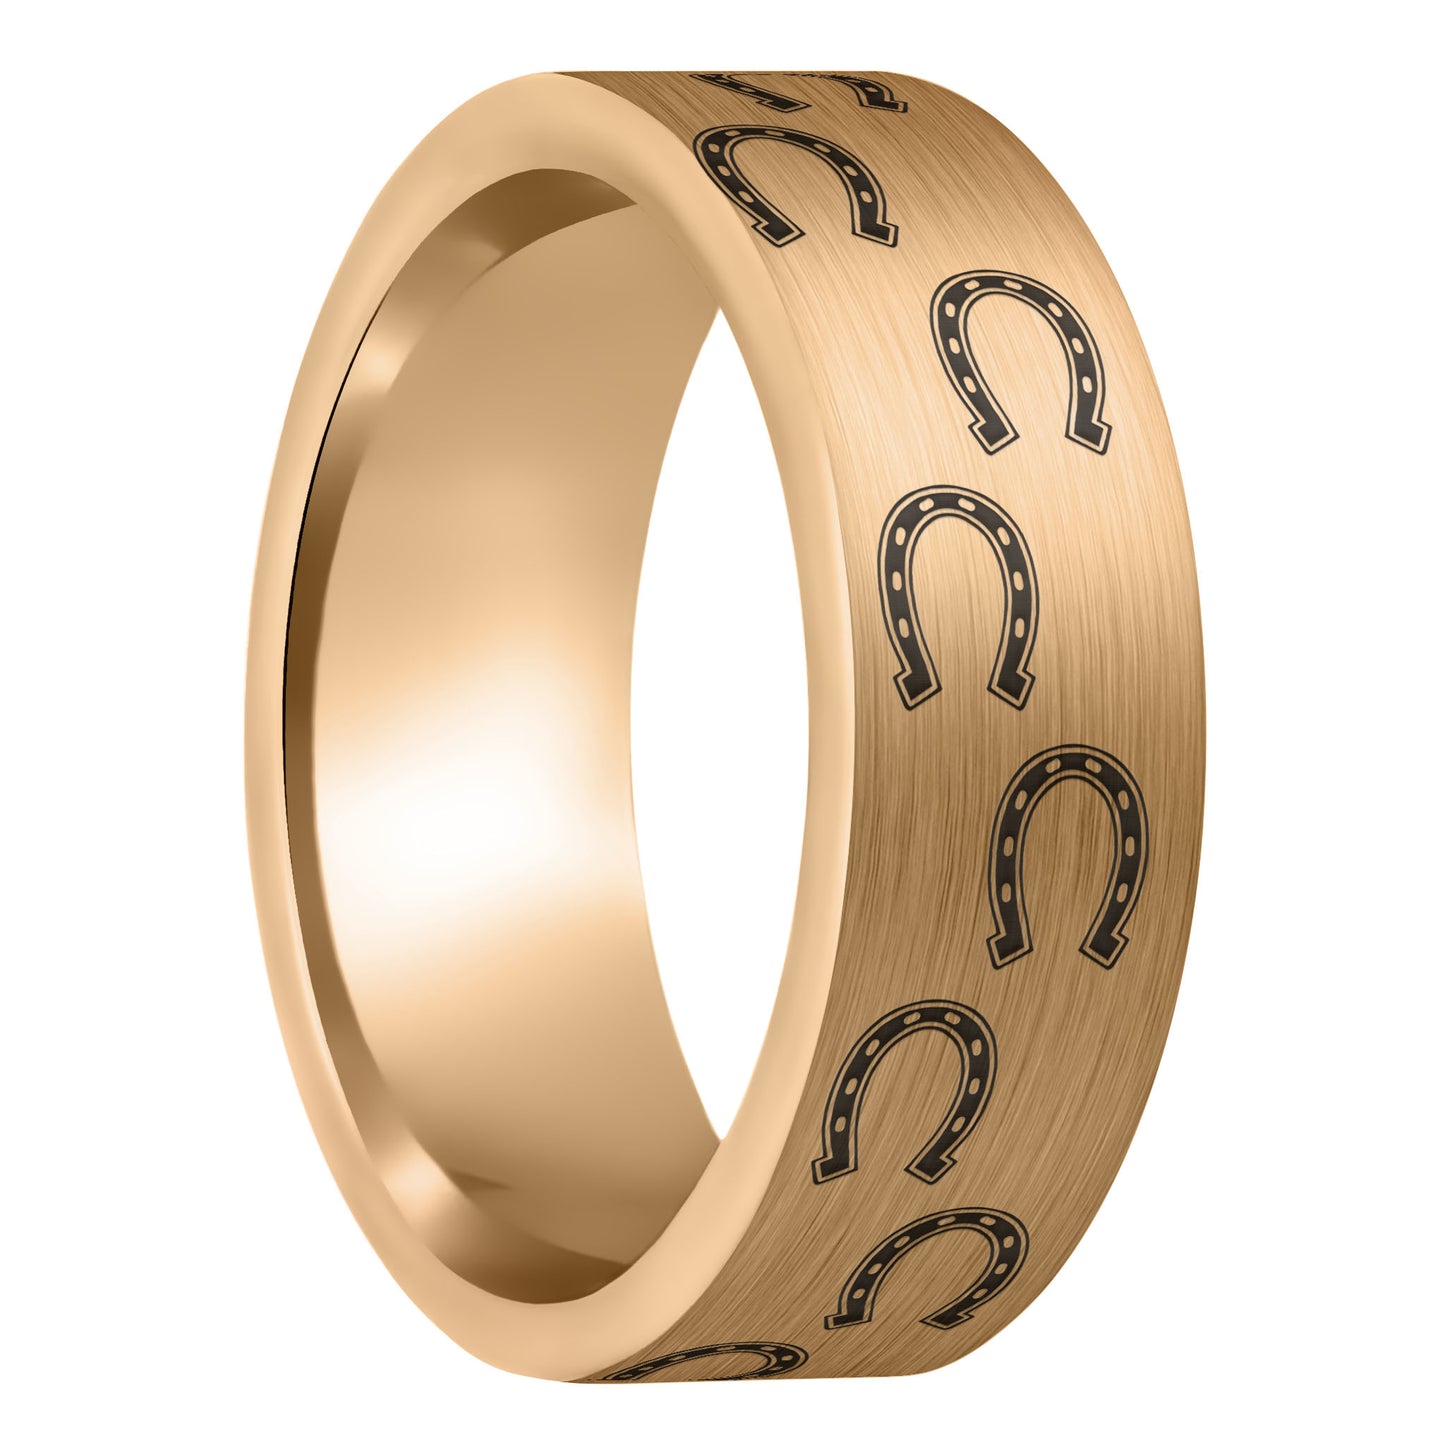 A horseshoes brushed rose gold tungsten men's wedding band displayed on a plain white background.